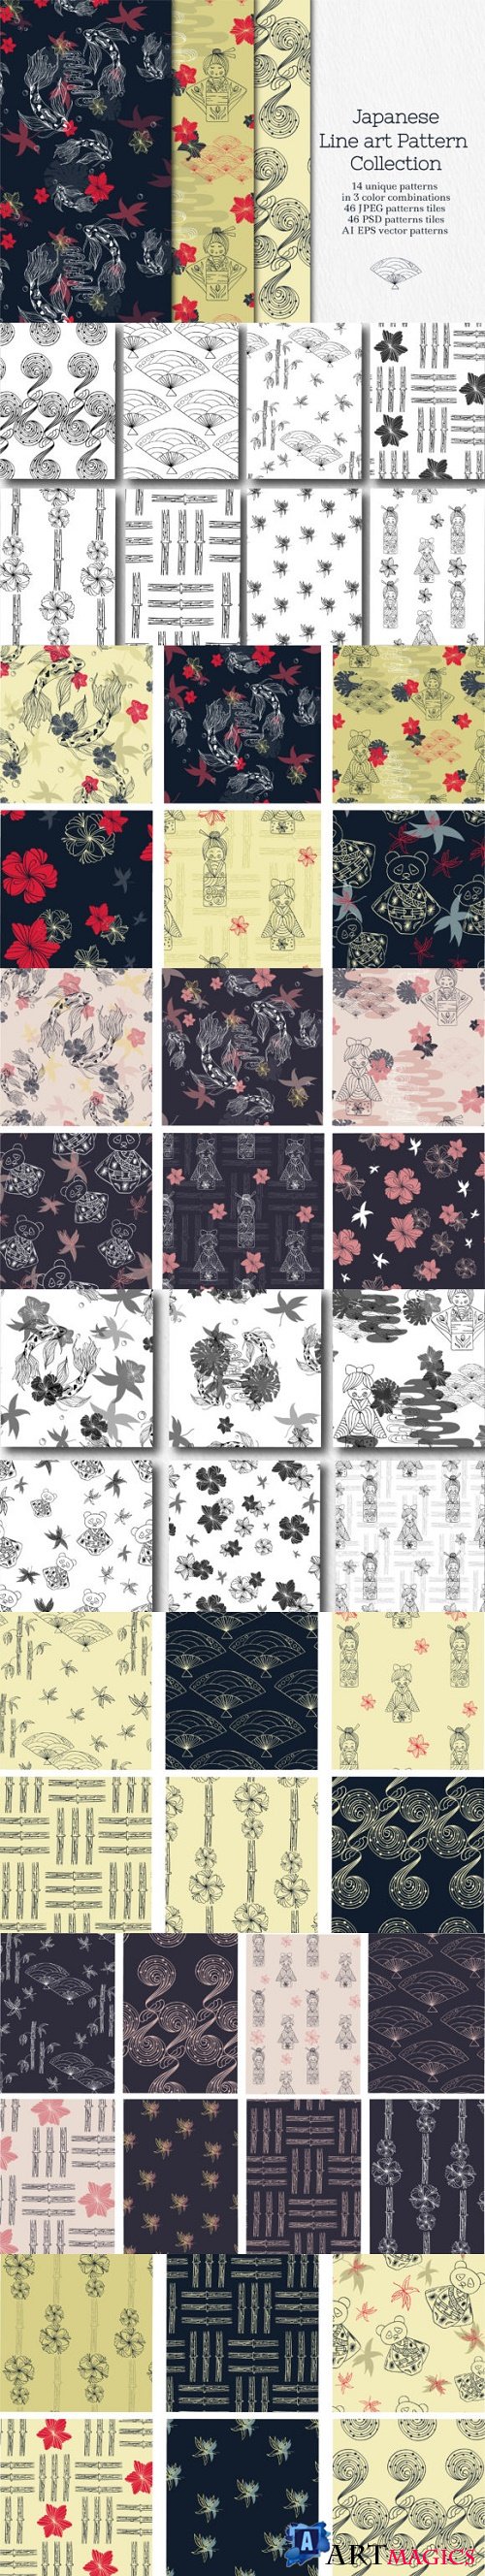 Line Art Japanese Pattern Collection 2962421